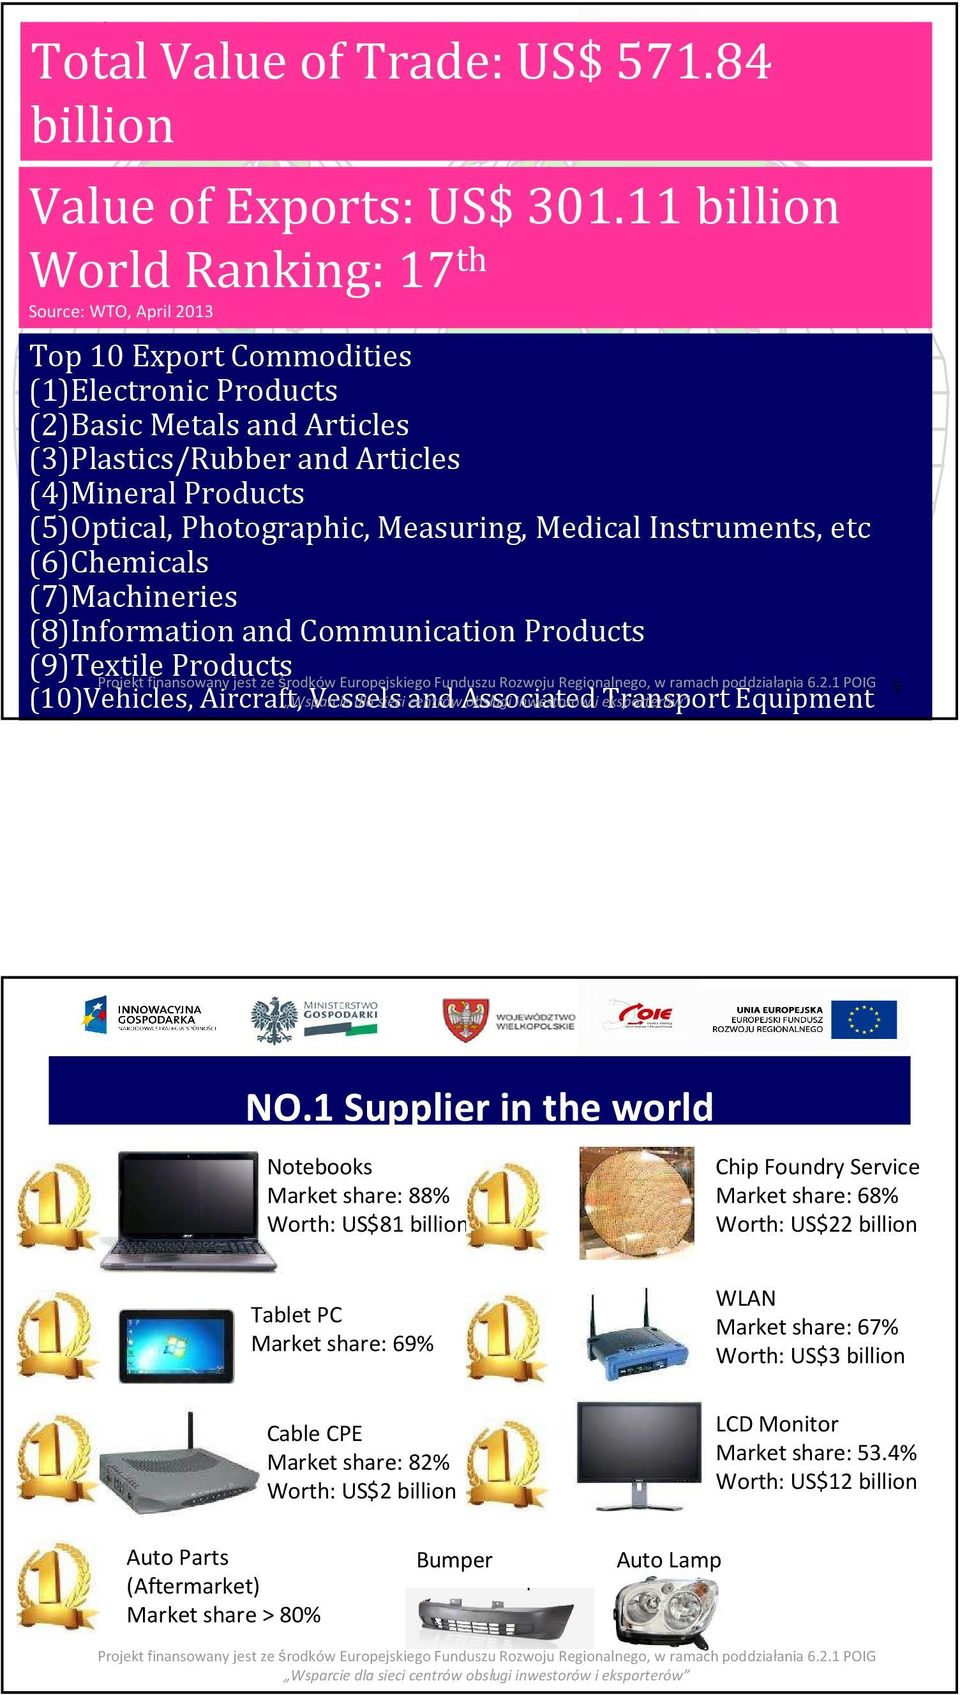 Photographic, Measuring, Medical Instruments, etc (6)Chemicals (7)Machineries (8)Information and Communication Products (9)Textile Products (10)Vehicles, Aircraft, Wsparcie Vessels dla sieci and